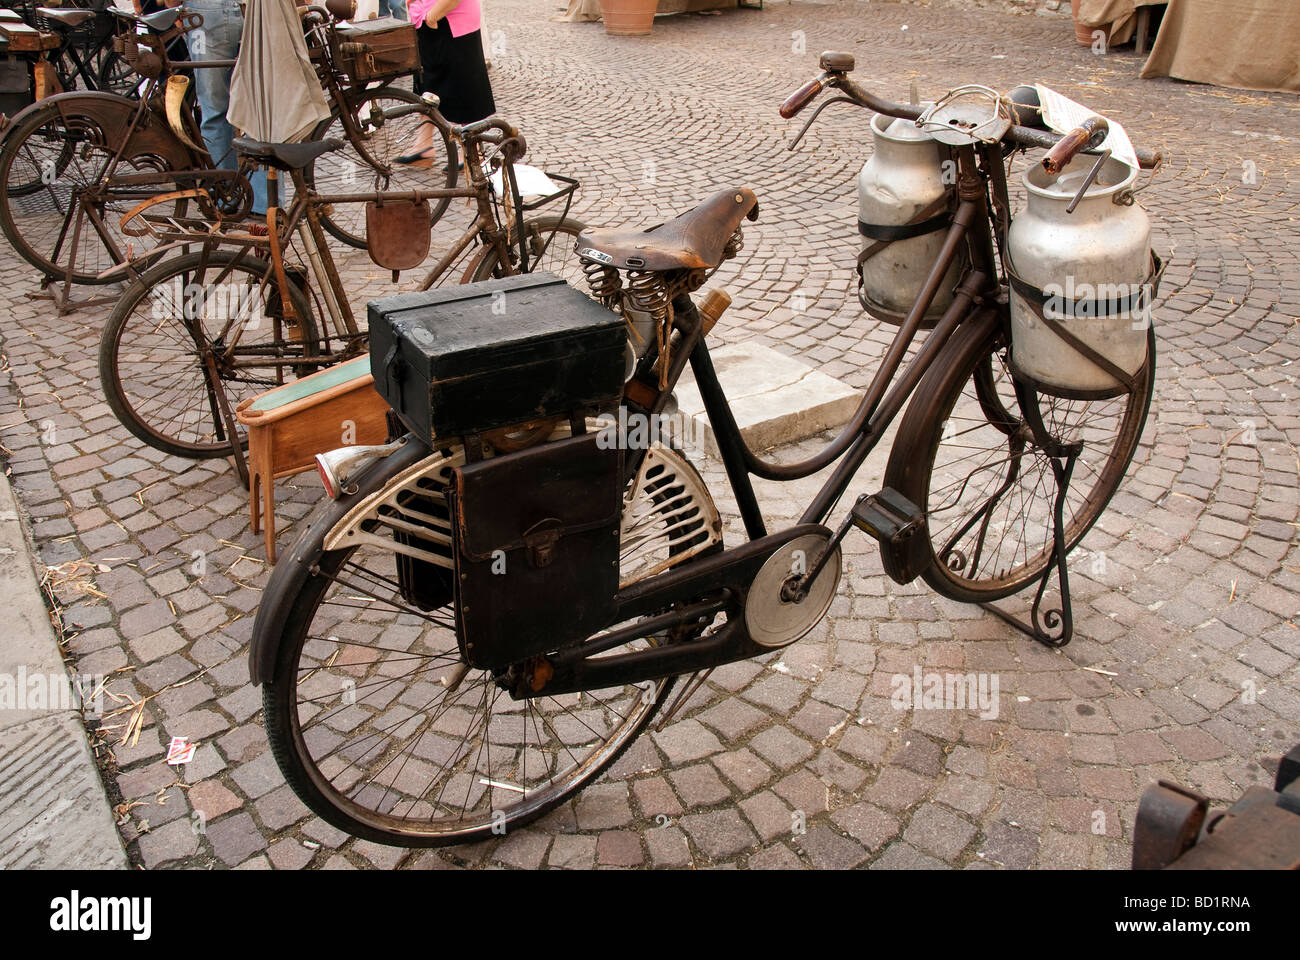 Vintage bicycles on display at a festival of old traditions in Sansepolcro Tuscany, milkman's bike Stock Photo